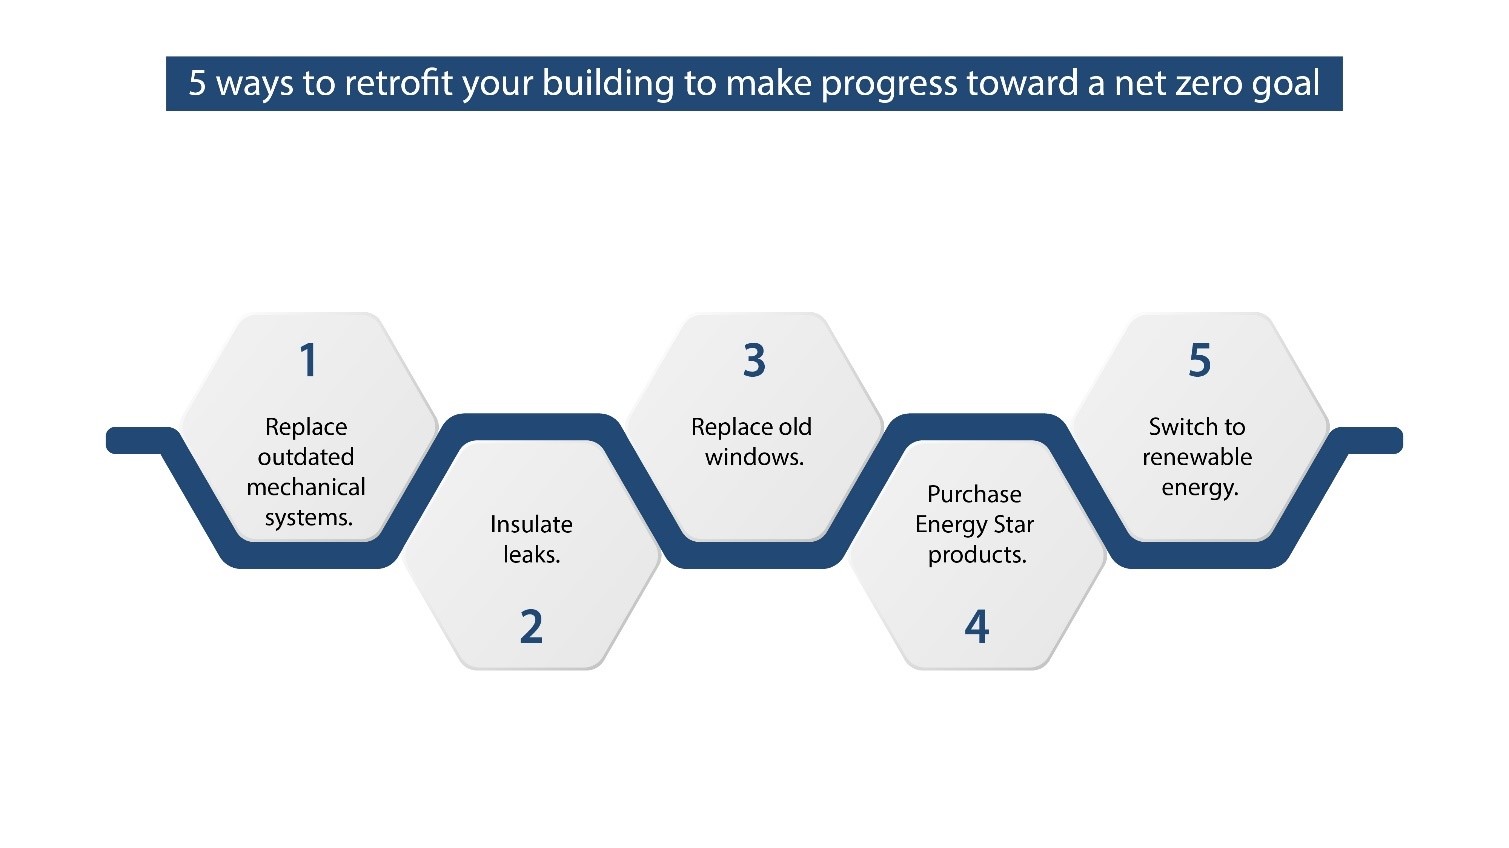 5 ways to retrofit your buildings to make progress towards a net zero goal_Russell and Dawson